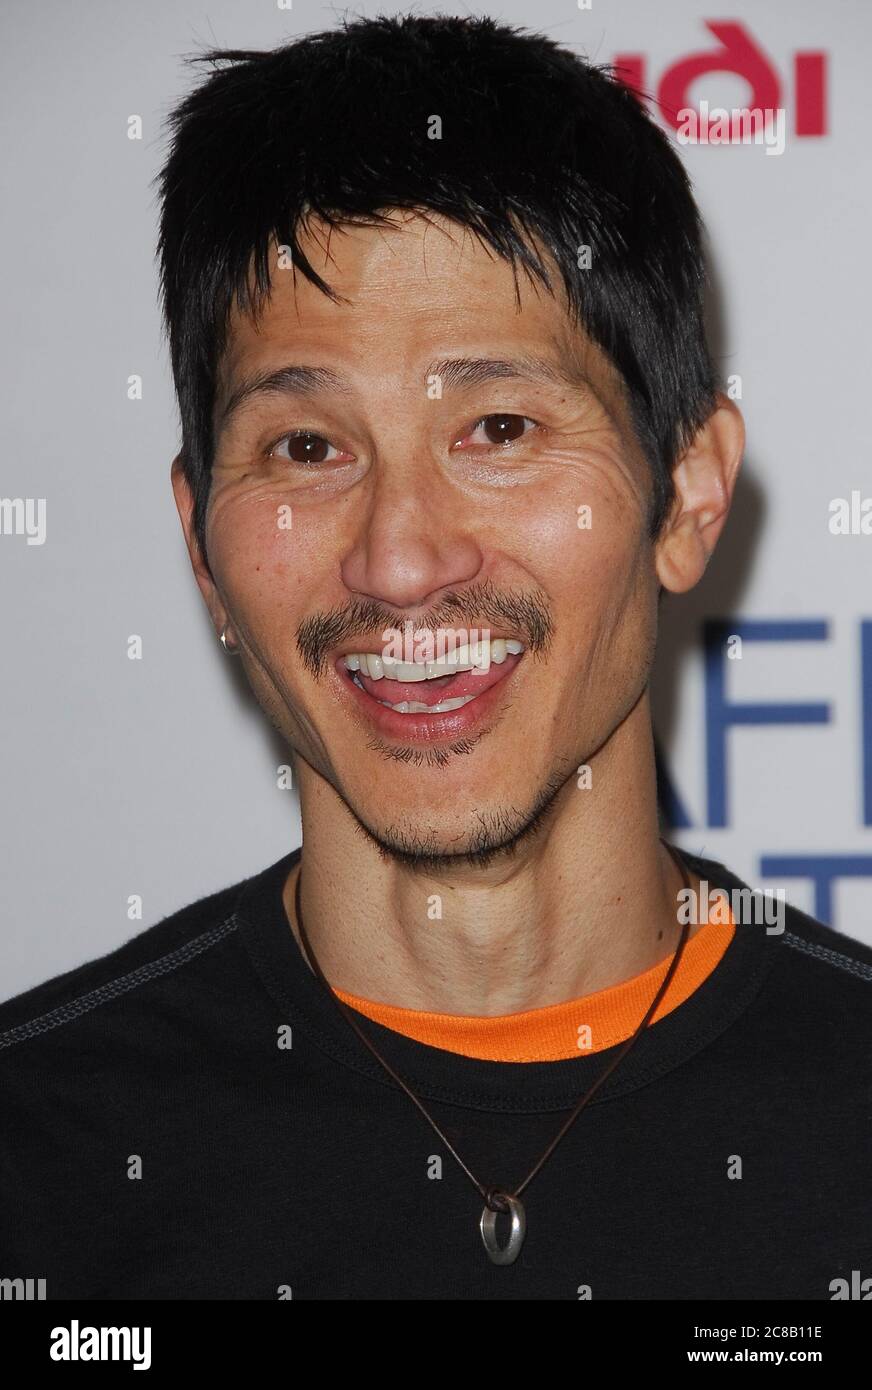 Filmmaker Greg Araki at the AFI FEST 2007 Presents a Screening of 'Smiley Face' held at the AFI Fest Rooftop Village of the Arclight Cinemas in Hollywood, CA. The event took place on Saturday, November 10, 2007. Photo by: SBM / PictureLux - File Reference # 34006-9923SBMPLX Stock Photo